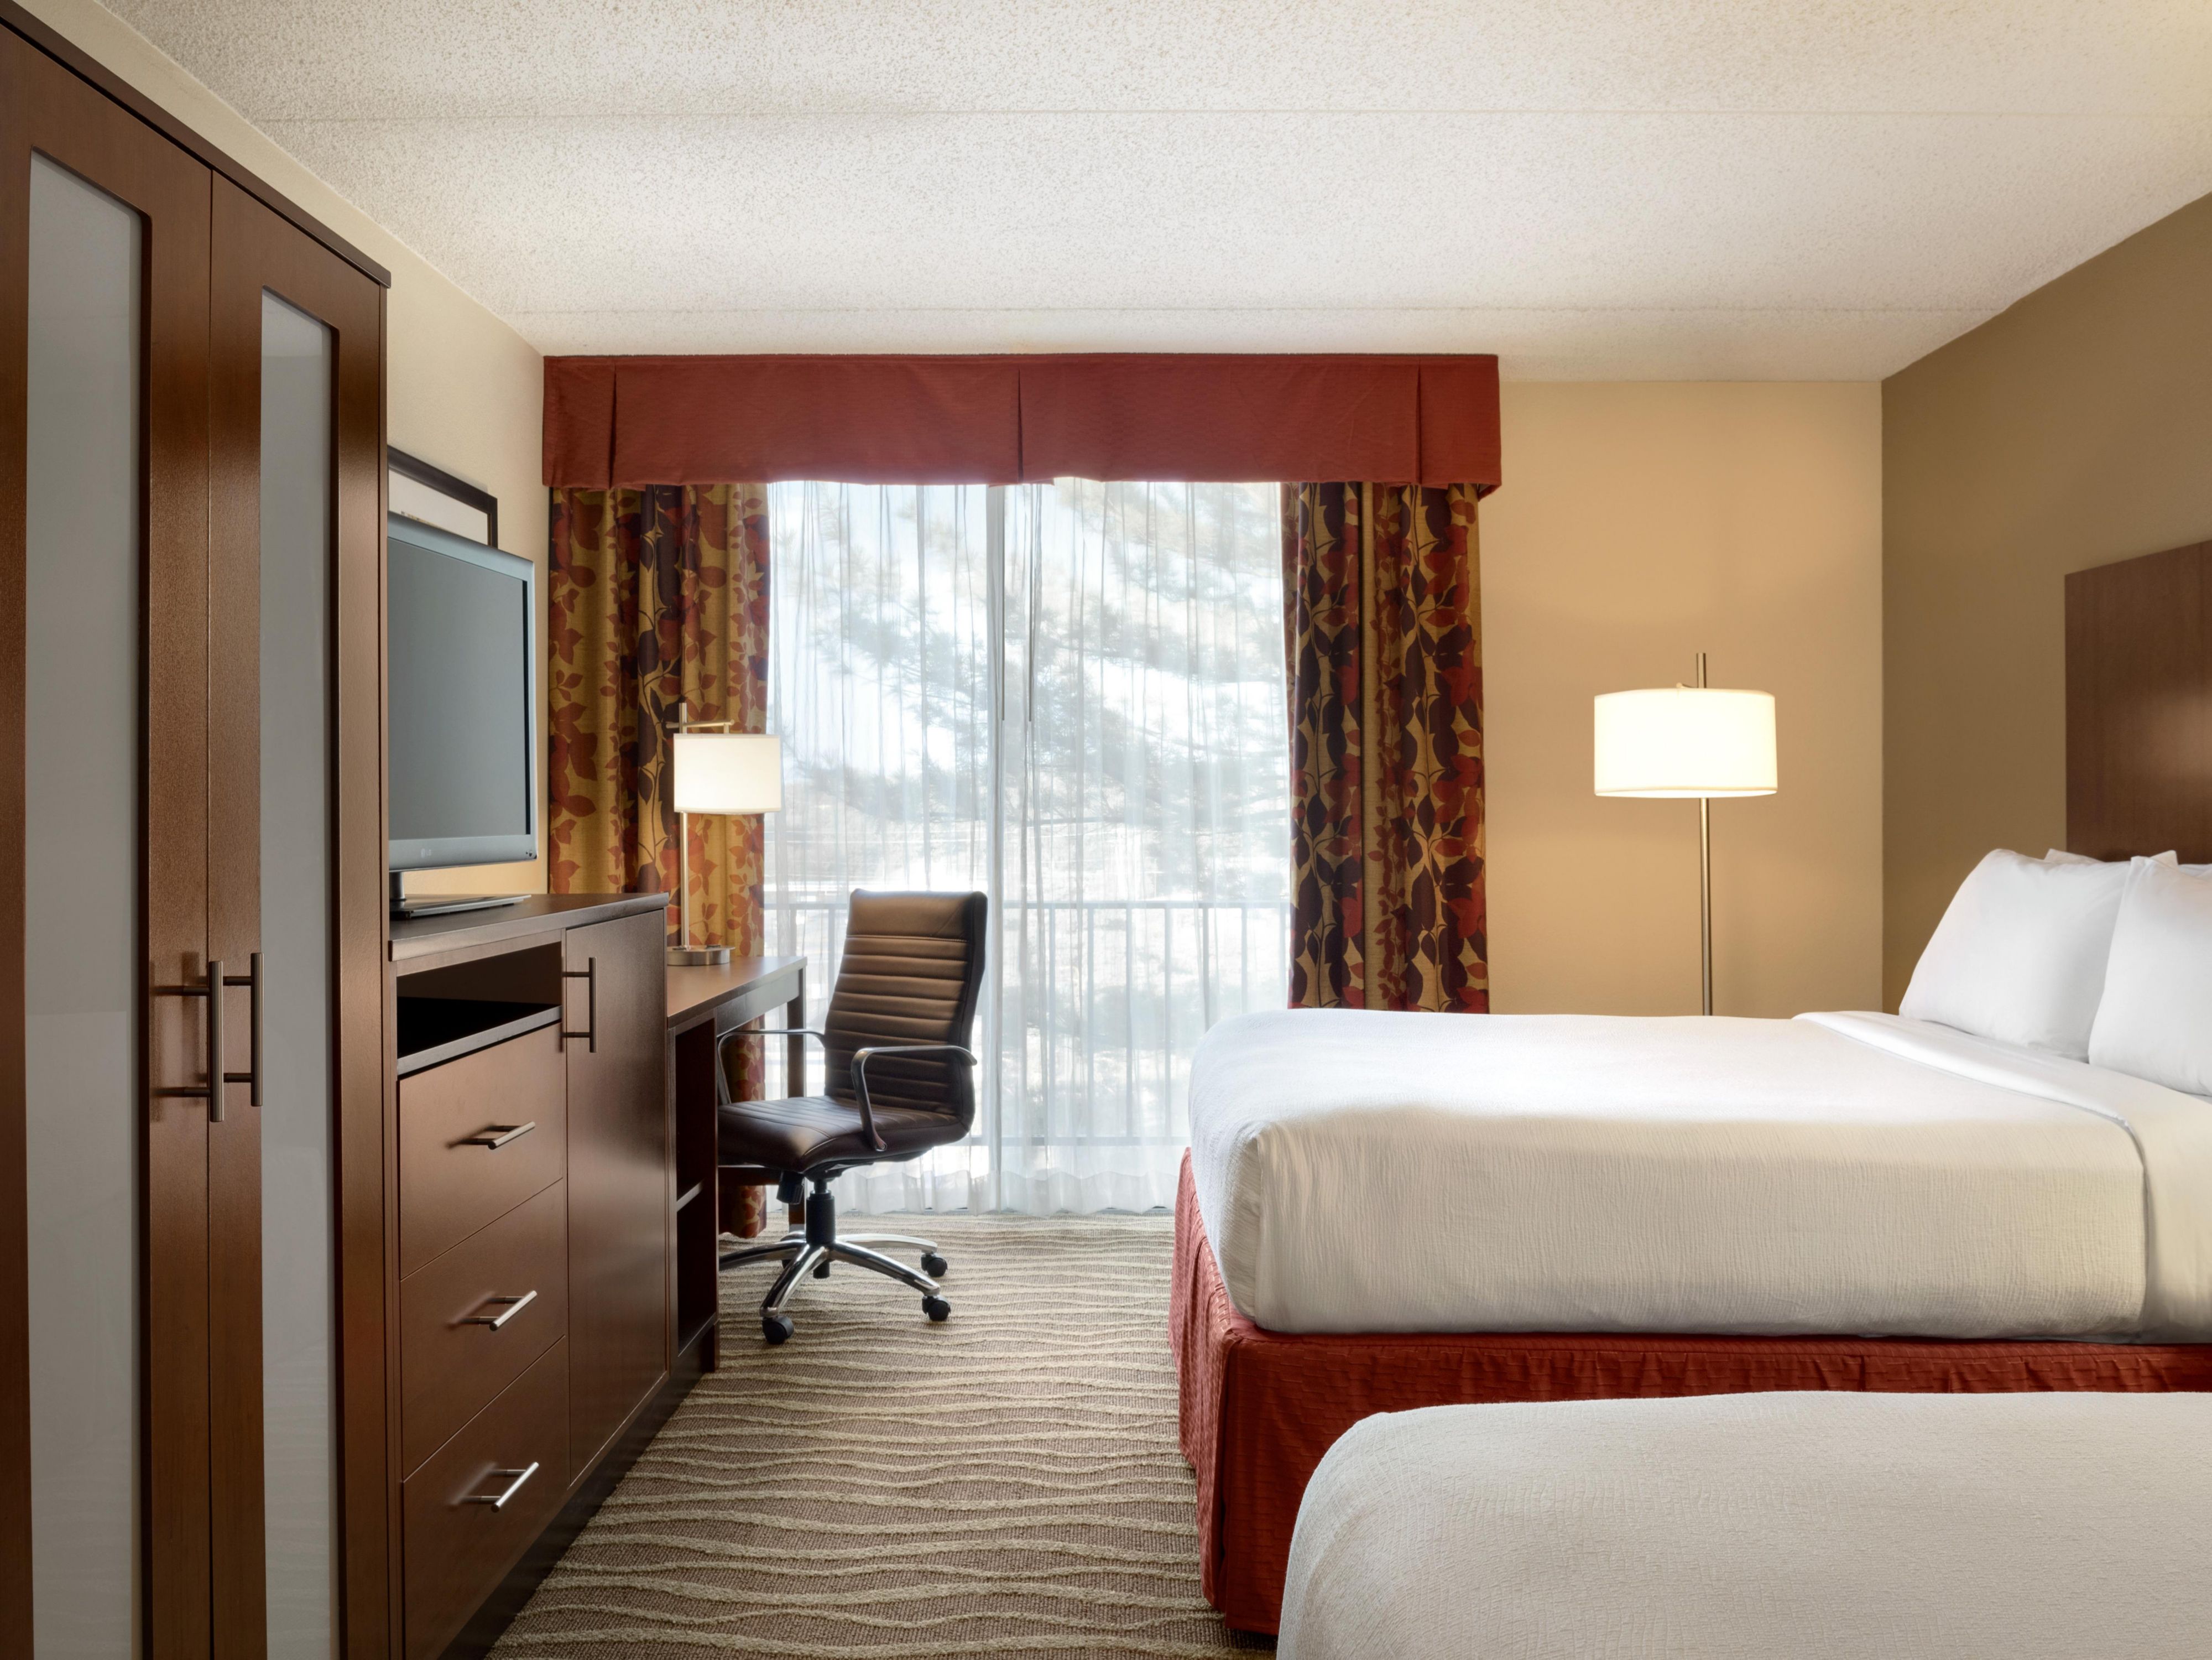 Guests love our unparalleled amenities that turn an average stay into a stress-free experience. Each guest room includes complimentary Wi-Fi, refrigerator, microwave, Keurig coffee maker, and comfortable bedding. Need more space? 
Upgrade to one of our spacious suites!